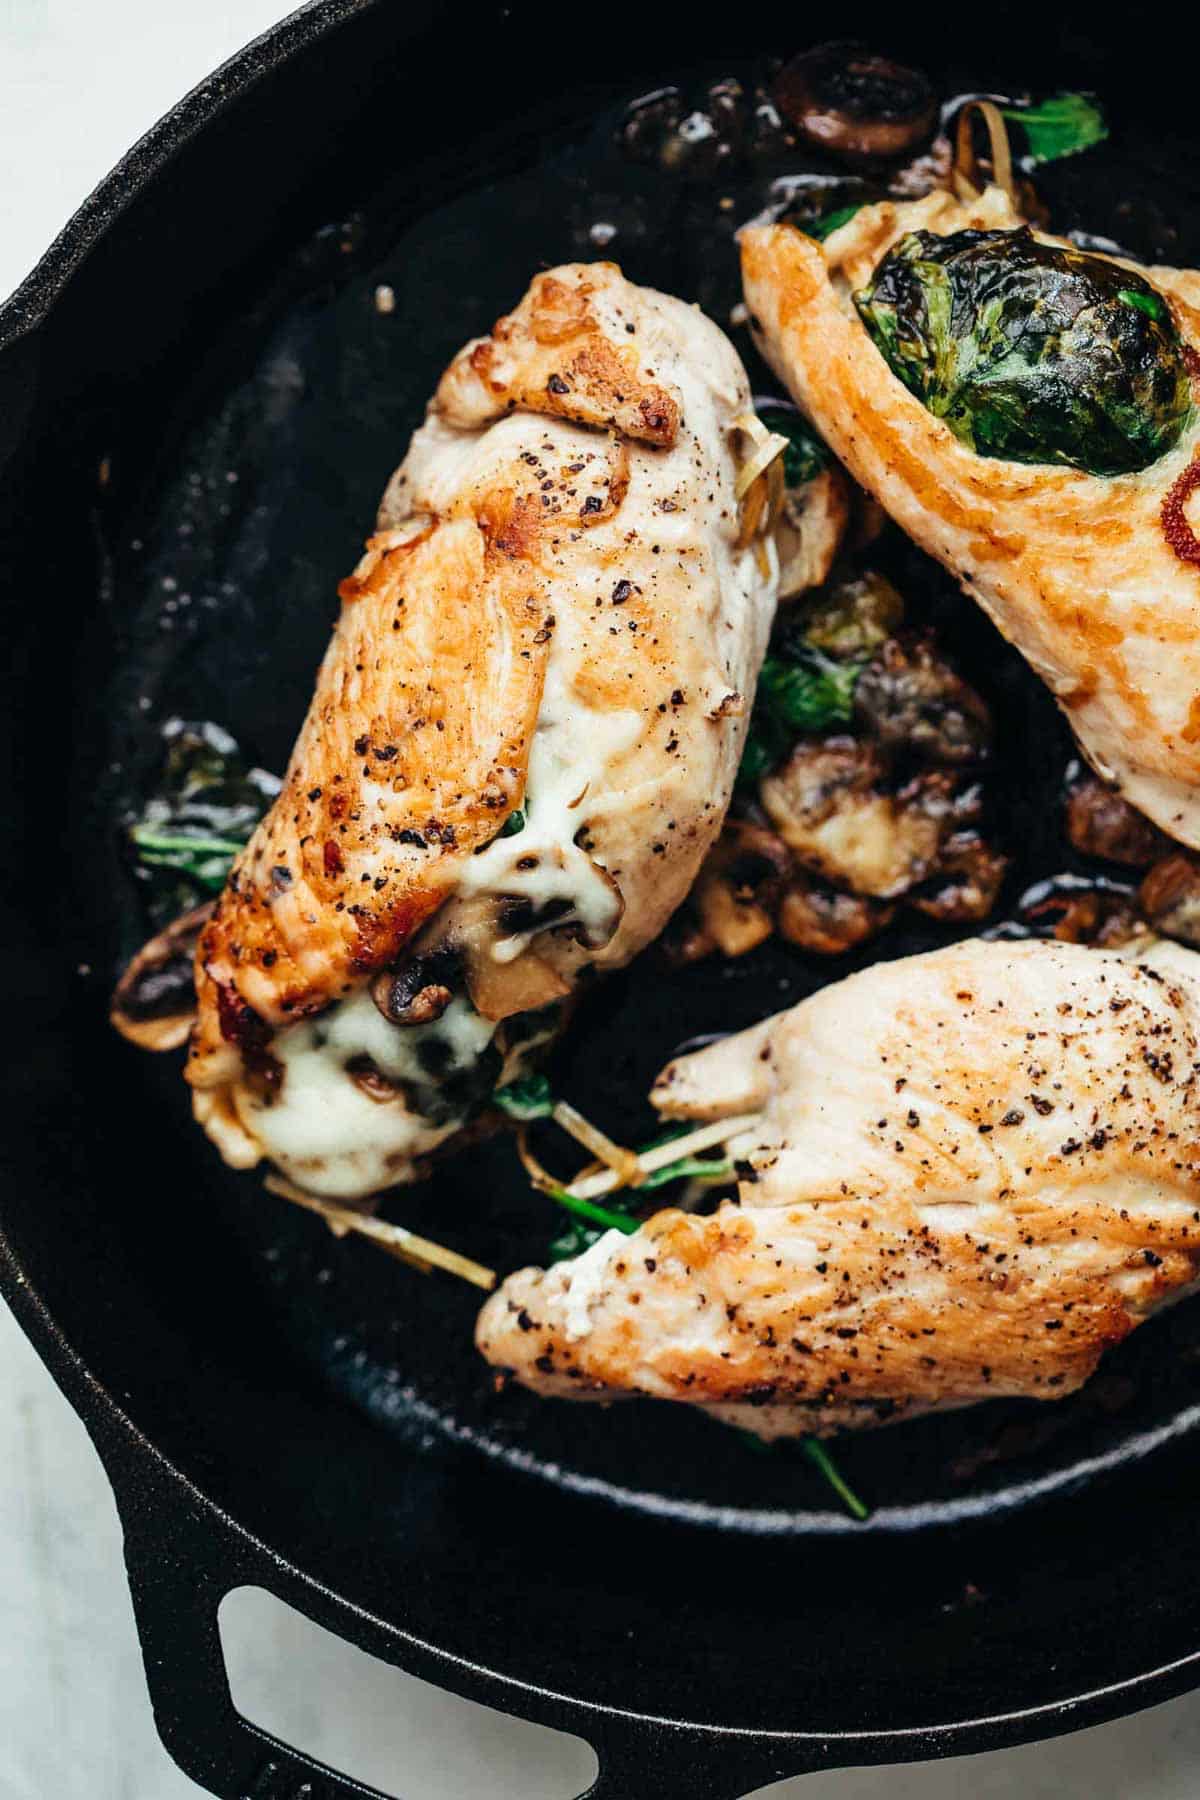 Spinach Mushroom stuffed Chicken Breast cooked in a cast iron pan.